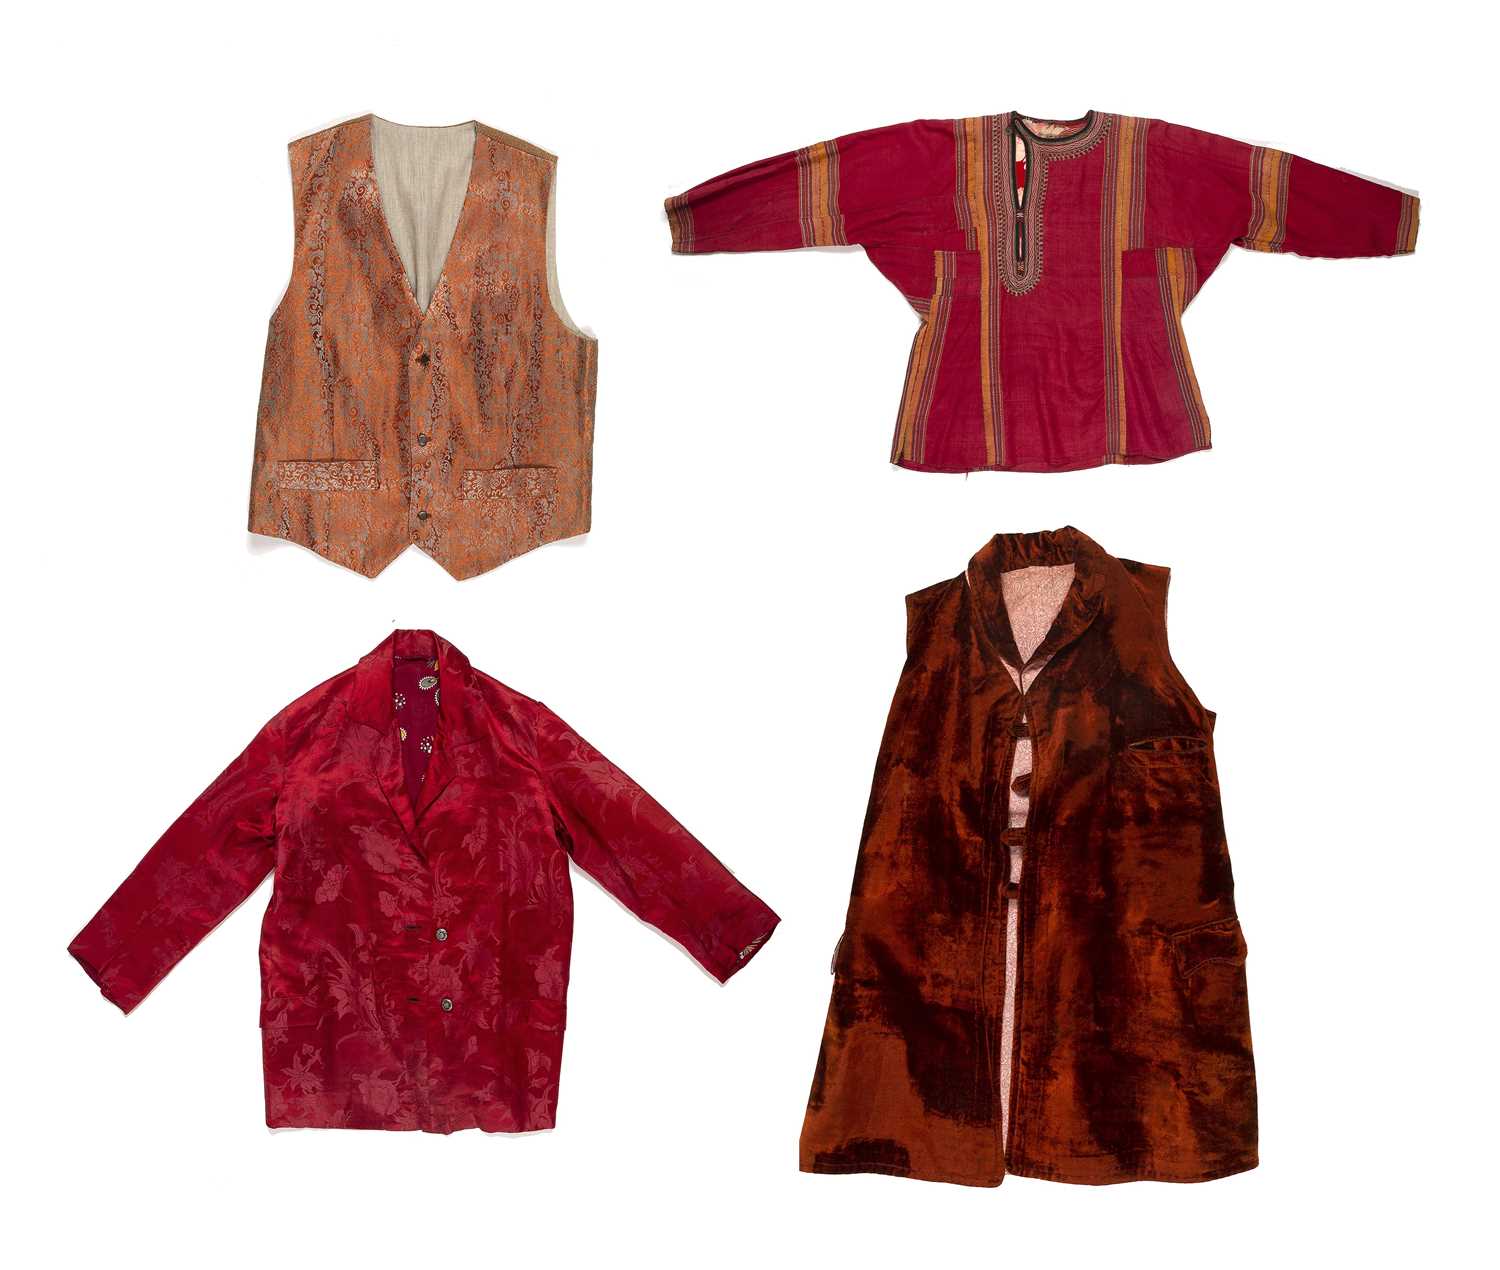 Group of four pieces including a Central Asian red silk and embroidered top, a Hungarian silk